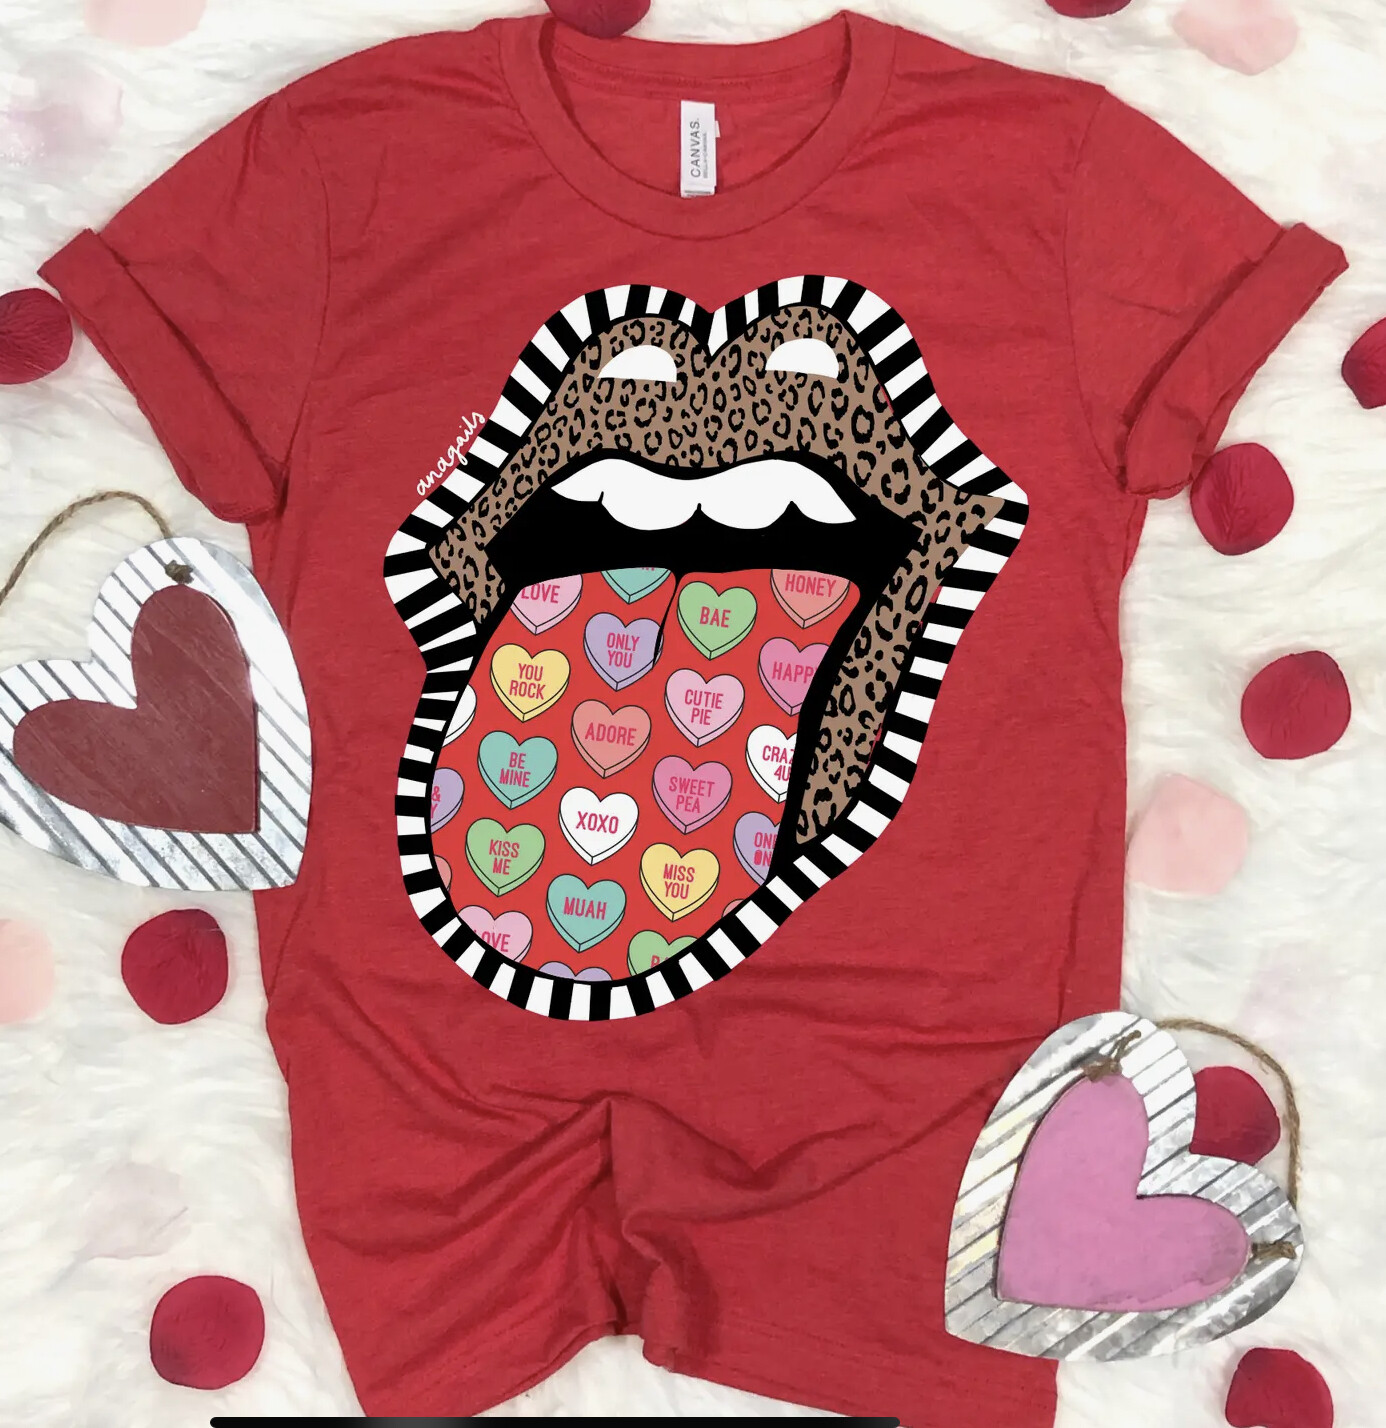 Valentine's Rock and Roll Tee